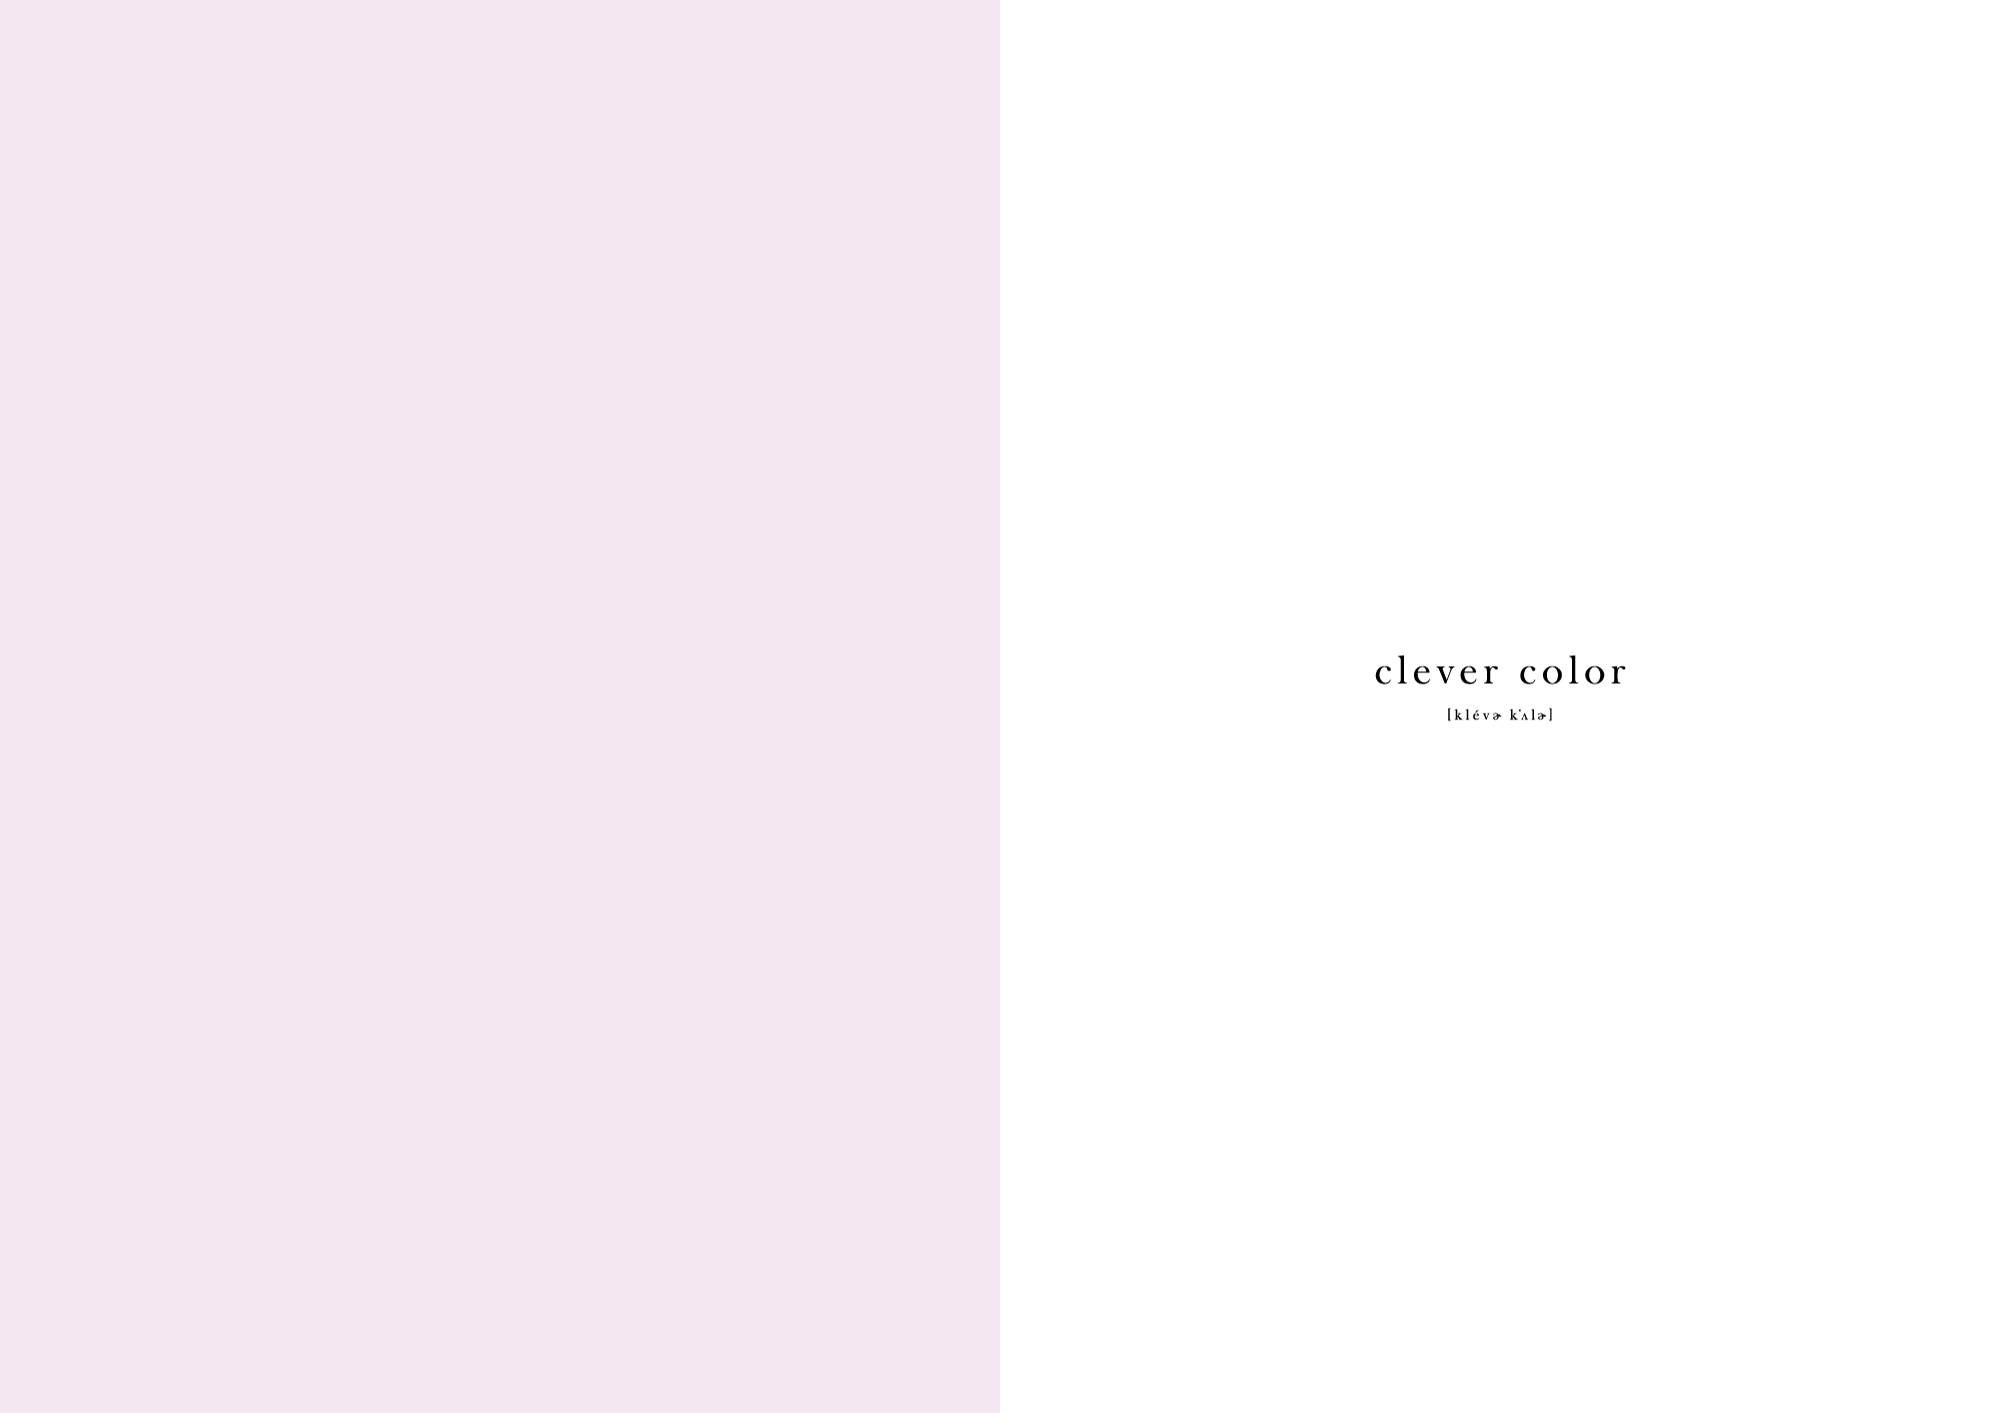 AW CLEVER PINK JOURNAL 01